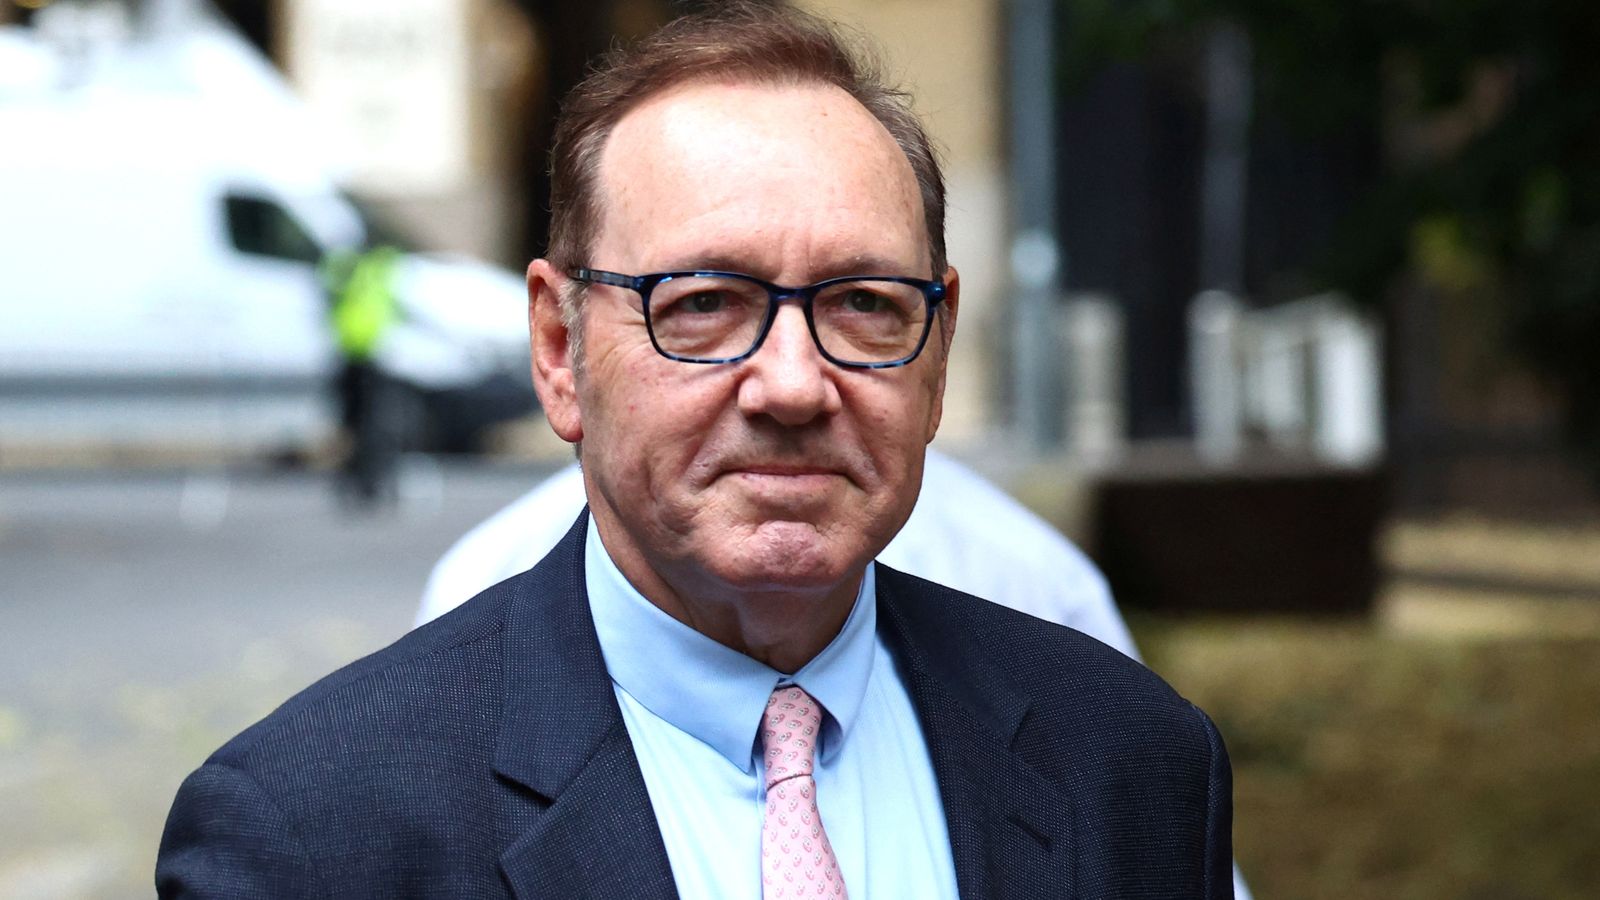 Why is Kevin Spacey in court and what are the allegations against him?